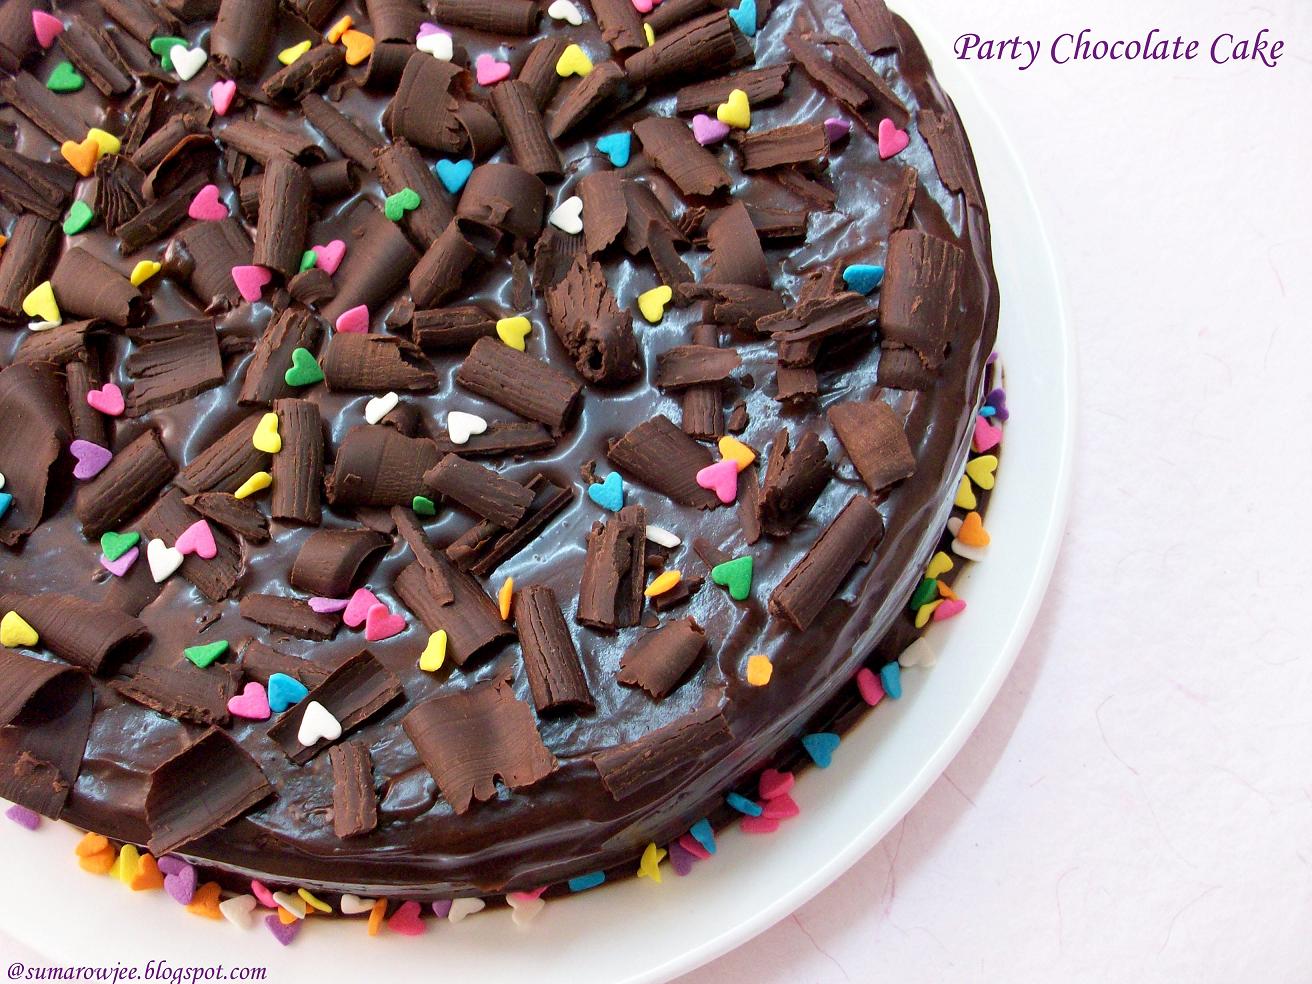 Cakes & More: Party Chocolate Cake